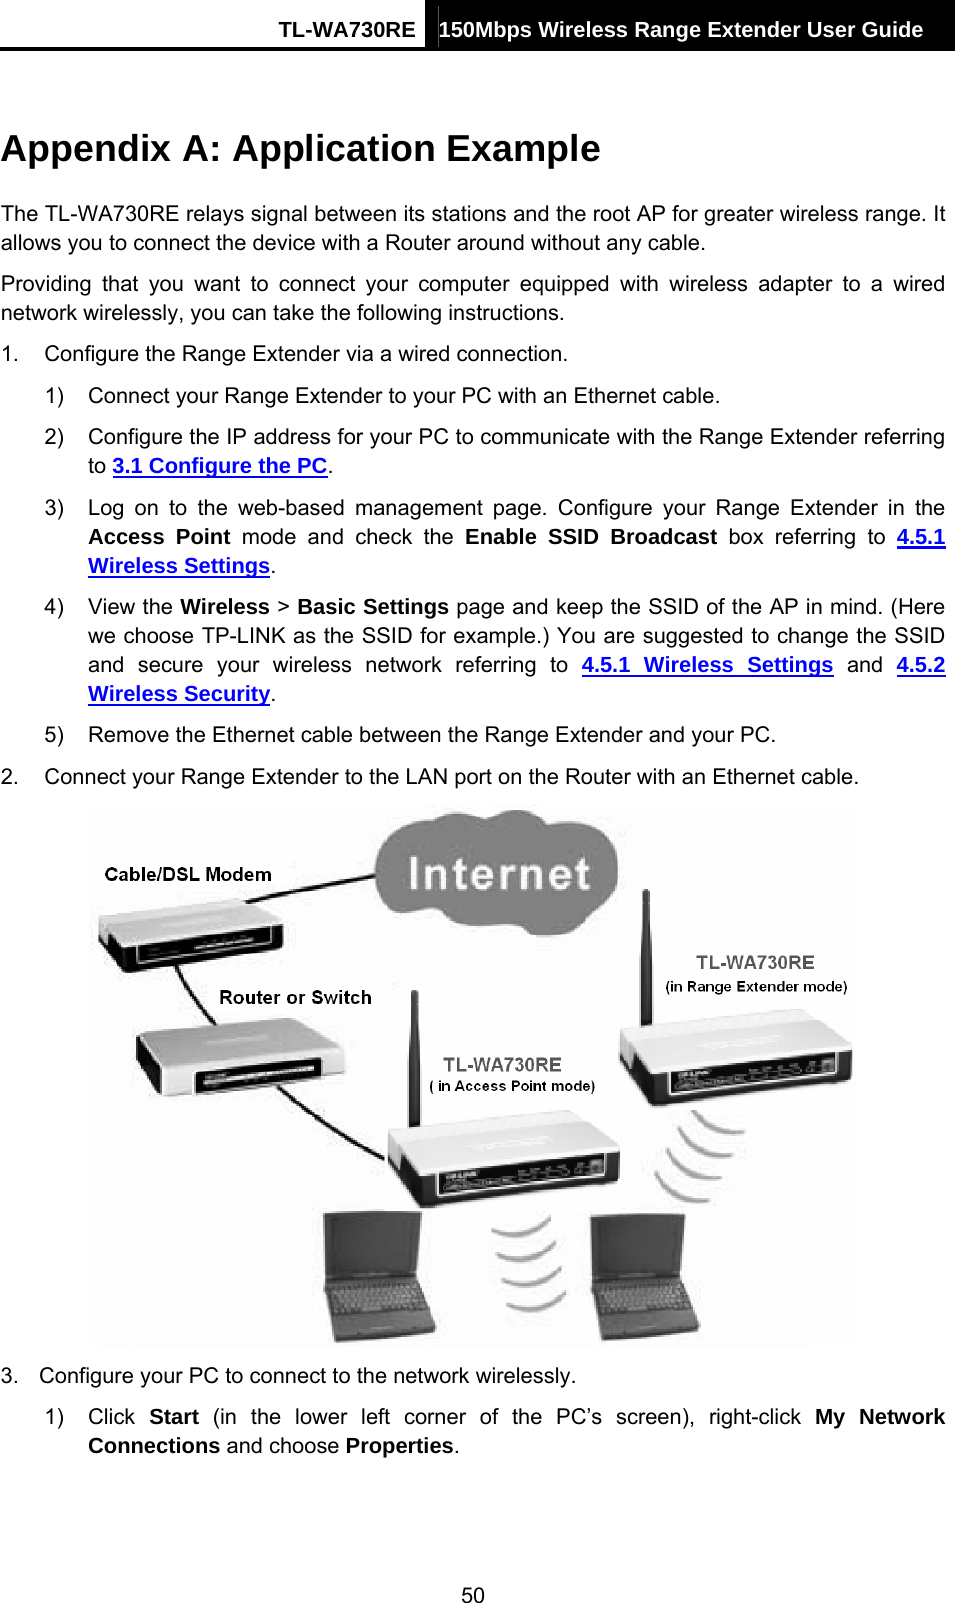 TL-WA730RE 150Mbps Wireless Range Extender User Guide  Appendix A: Application Example The TL-WA730RE relays signal between its stations and the root AP for greater wireless range. It allows you to connect the device with a Router around without any cable. Providing that you want to connect your computer equipped with wireless adapter to a wired network wirelessly, you can take the following instructions. 1.  Configure the Range Extender via a wired connection. 1)  Connect your Range Extender to your PC with an Ethernet cable. 2)  Configure the IP address for your PC to communicate with the Range Extender referring to 3.1 Configure the PC. 3)  Log on to the web-based management page. Configure your Range Extender in the Access Point mode and check the Enable SSID Broadcast box referring to 4.5.1 Wireless Settings. 4) View the Wireless &gt; Basic Settings page and keep the SSID of the AP in mind. (Here we choose TP-LINK as the SSID for example.) You are suggested to change the SSID and secure your wireless network referring to 4.5.1 Wireless Settings and 4.5.2 Wireless Security. 5)  Remove the Ethernet cable between the Range Extender and your PC. 2.  Connect your Range Extender to the LAN port on the Router with an Ethernet cable.  3.  Configure your PC to connect to the network wirelessly. 1) Click Start (in the lower left corner of the PC’s screen), right-click My Network Connections and choose Properties. 50 